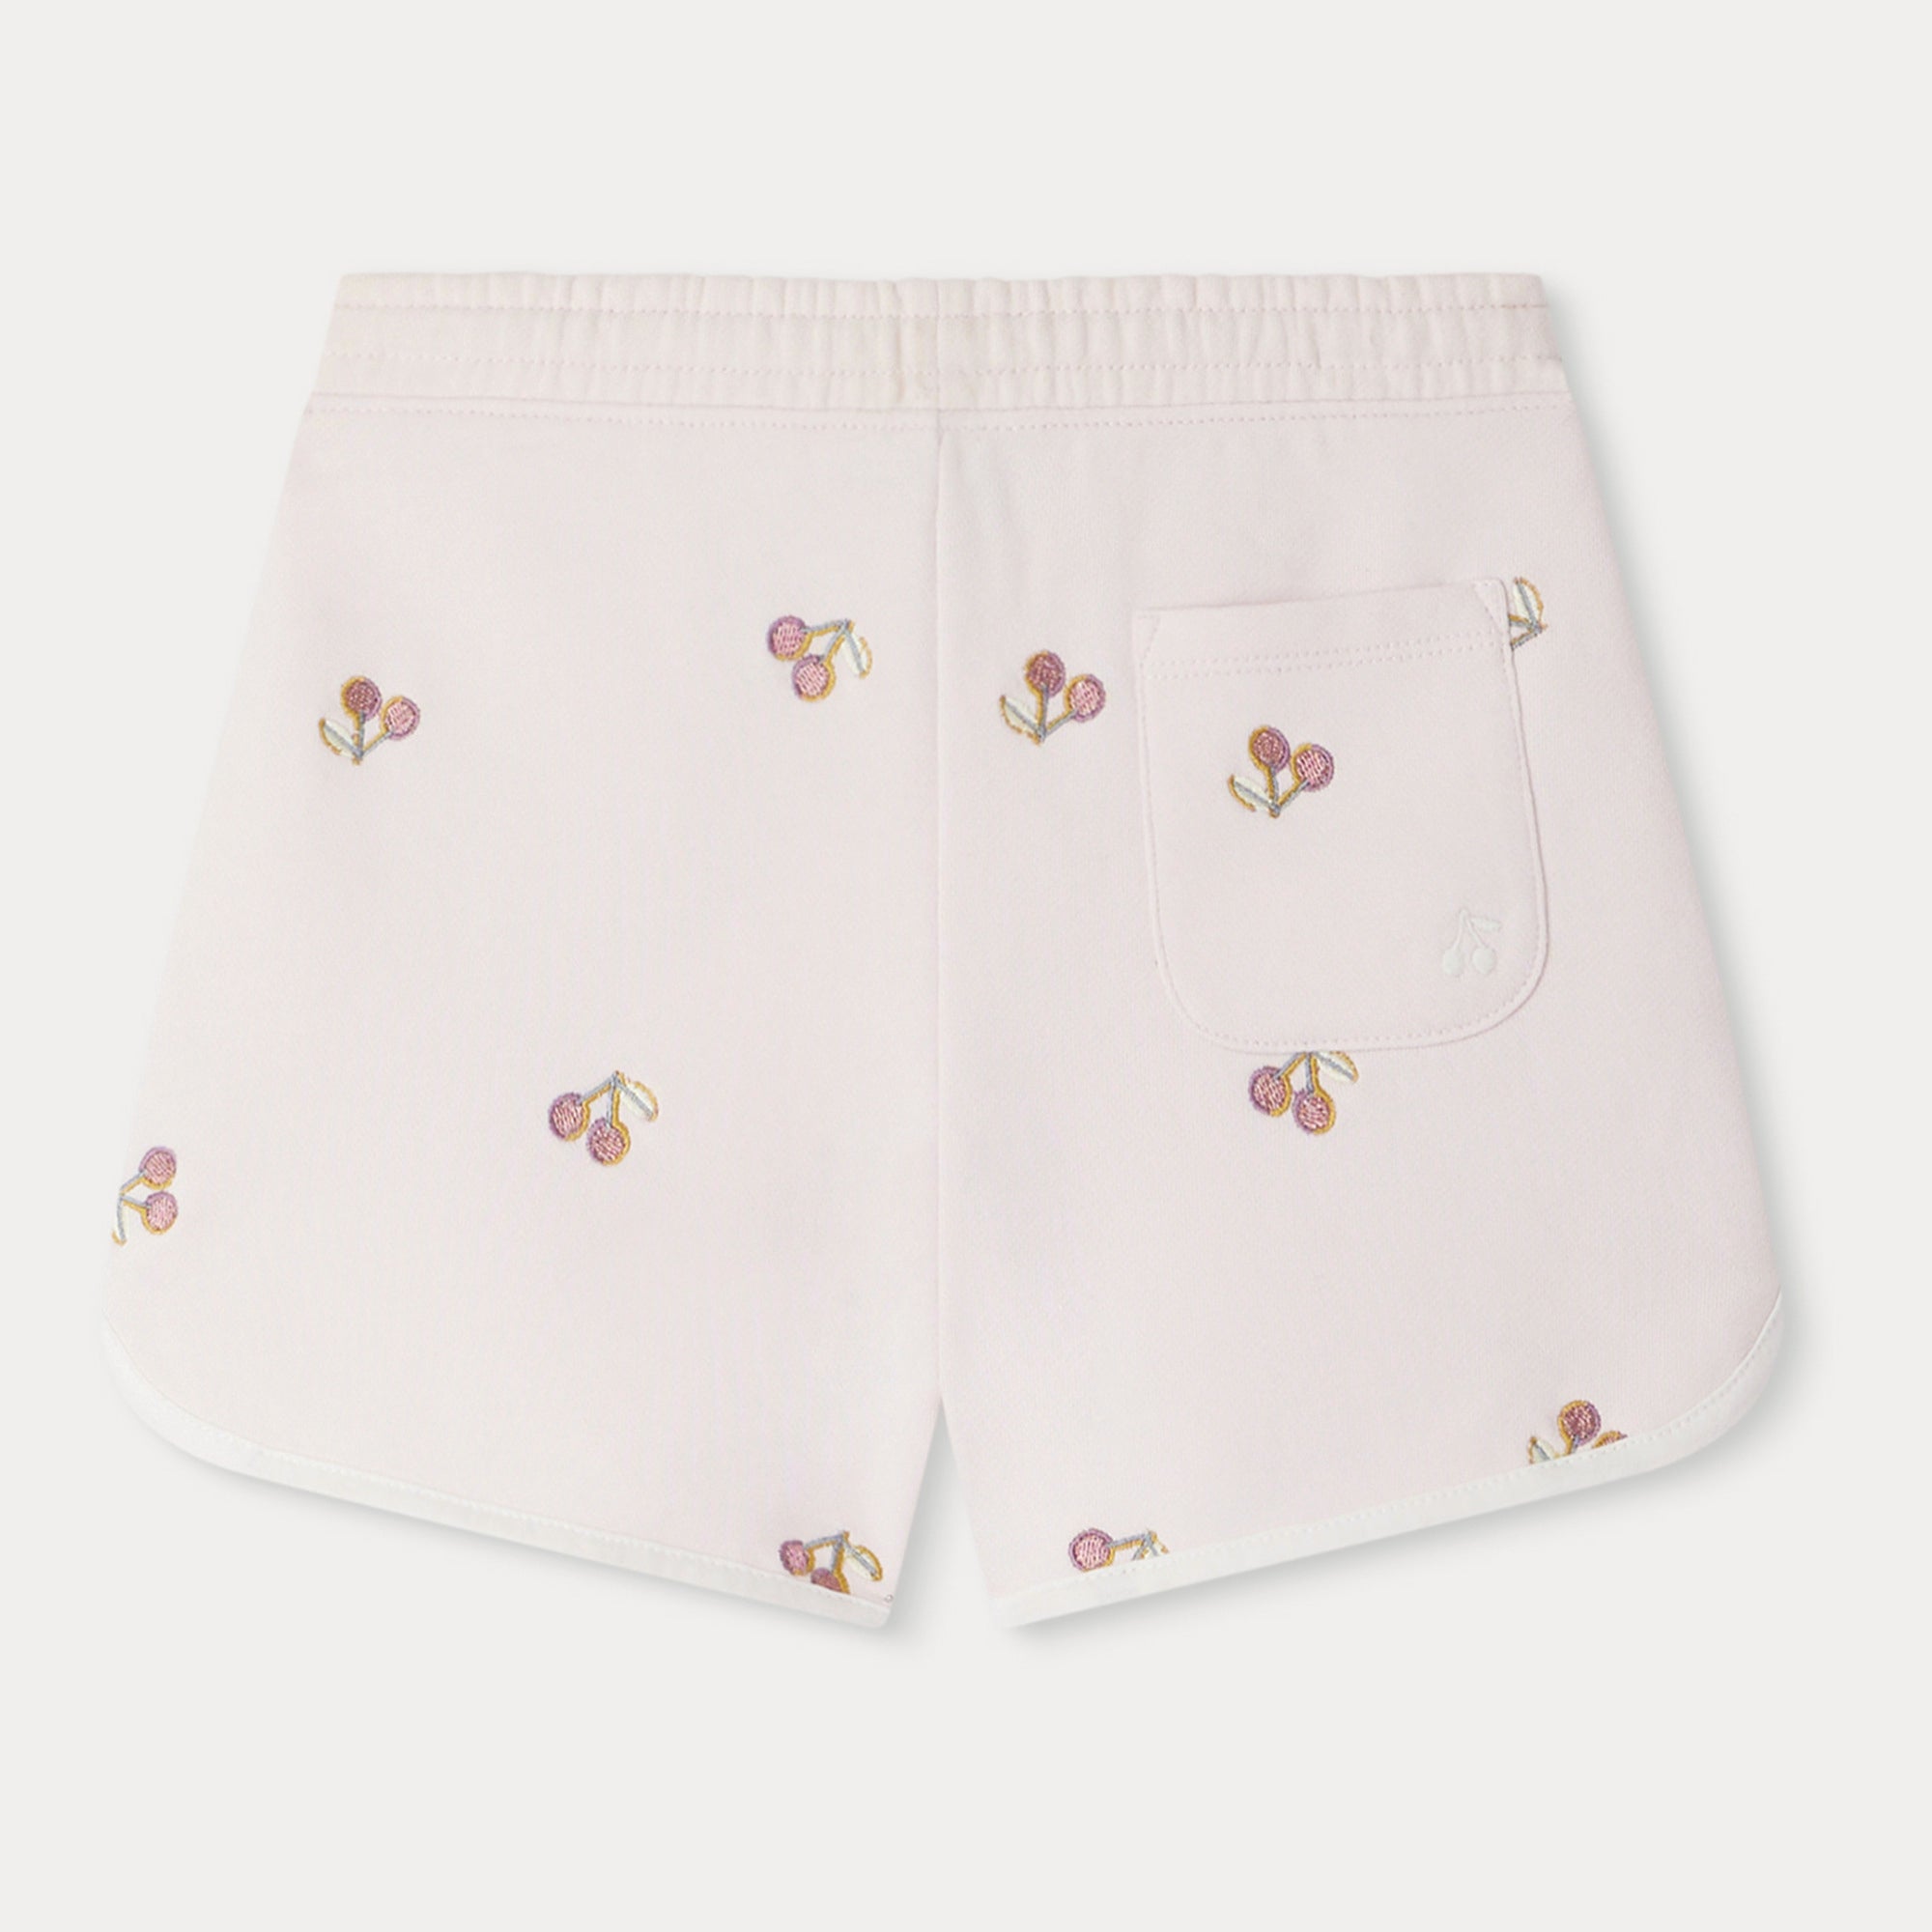 Girls Pink Embroidered Cotton Shorts